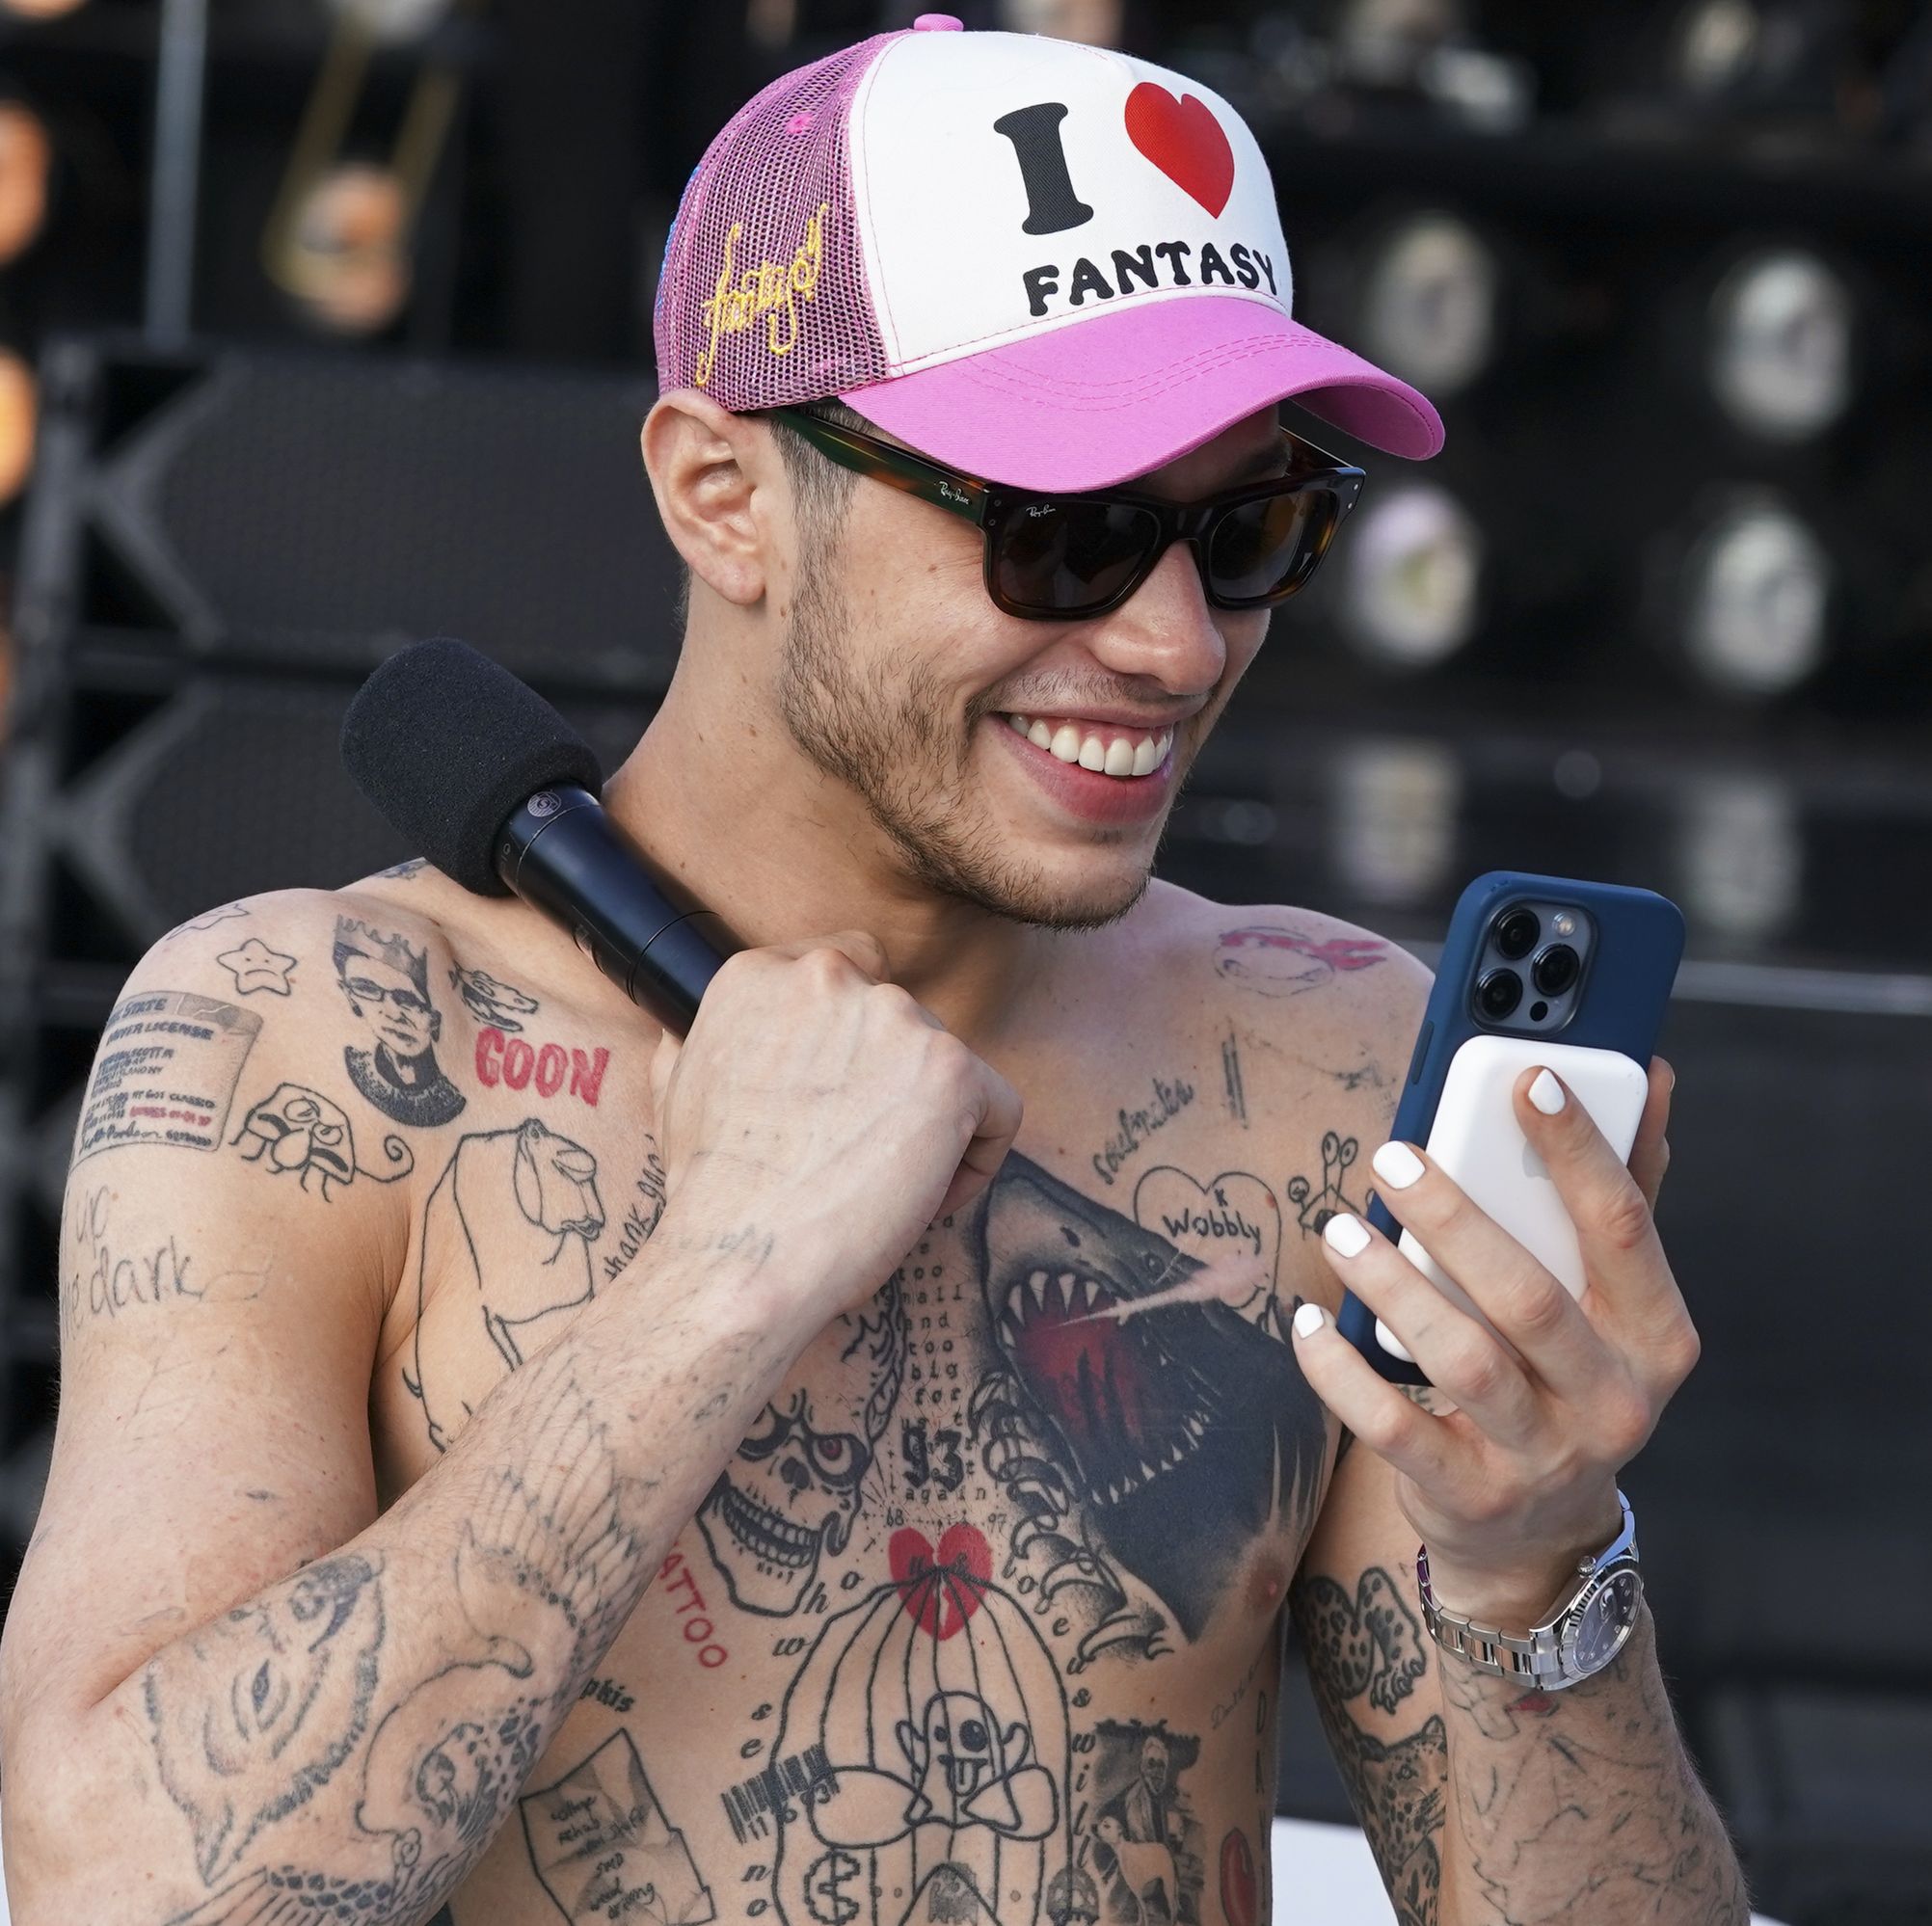 ALERT: Pete Davidson Appears to Have a Giant 